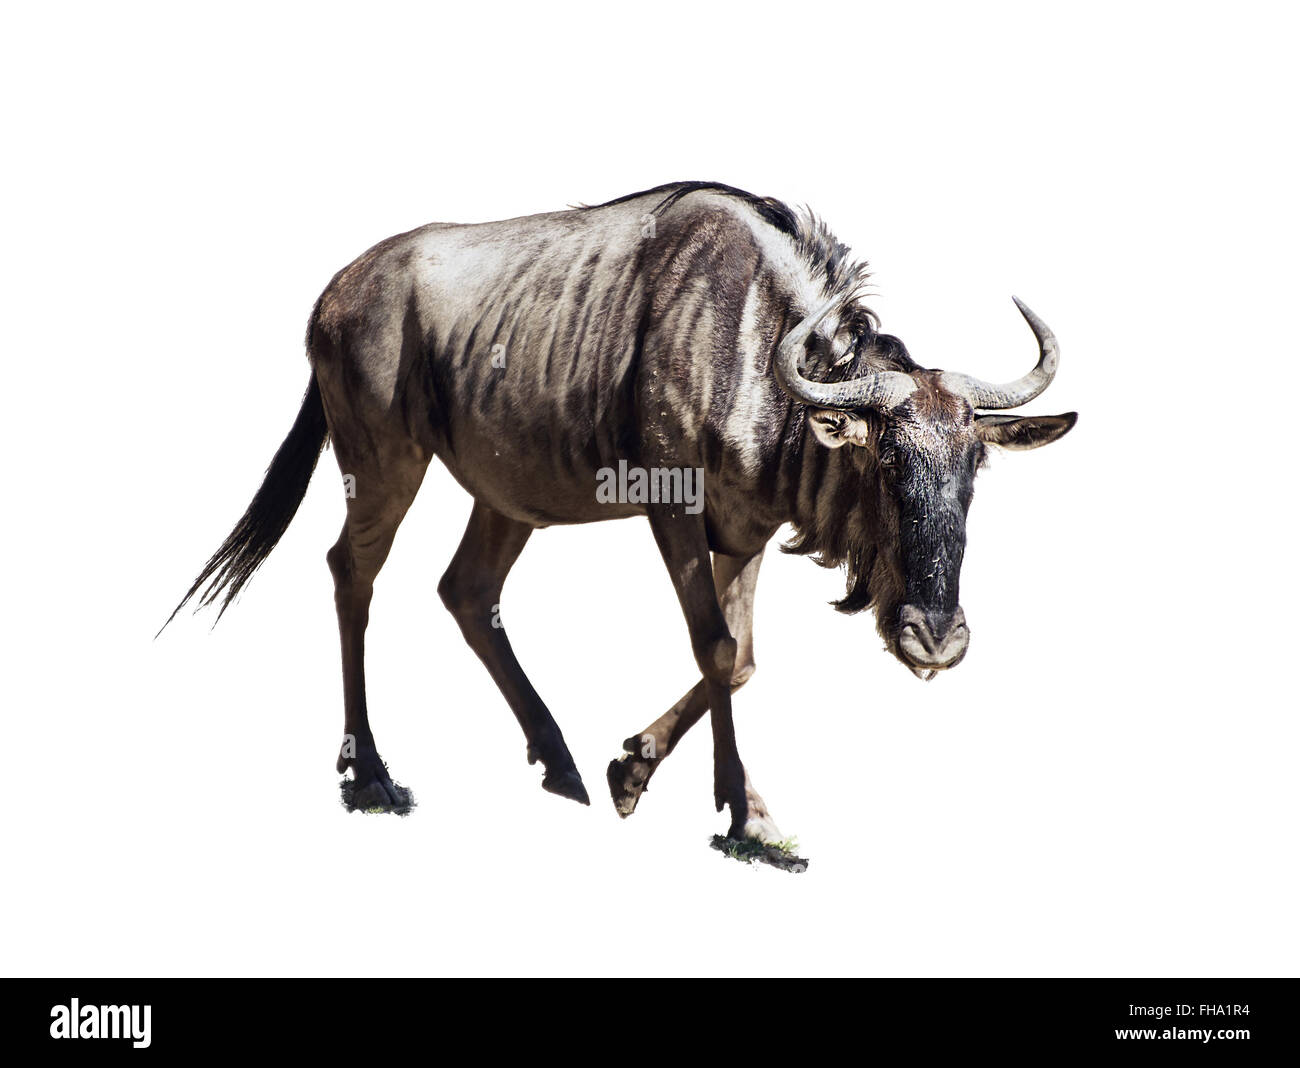 Blue wildebeest (Connochaetes taurinus) in the african savannah. Animal isolated on the white background. Stock Photo